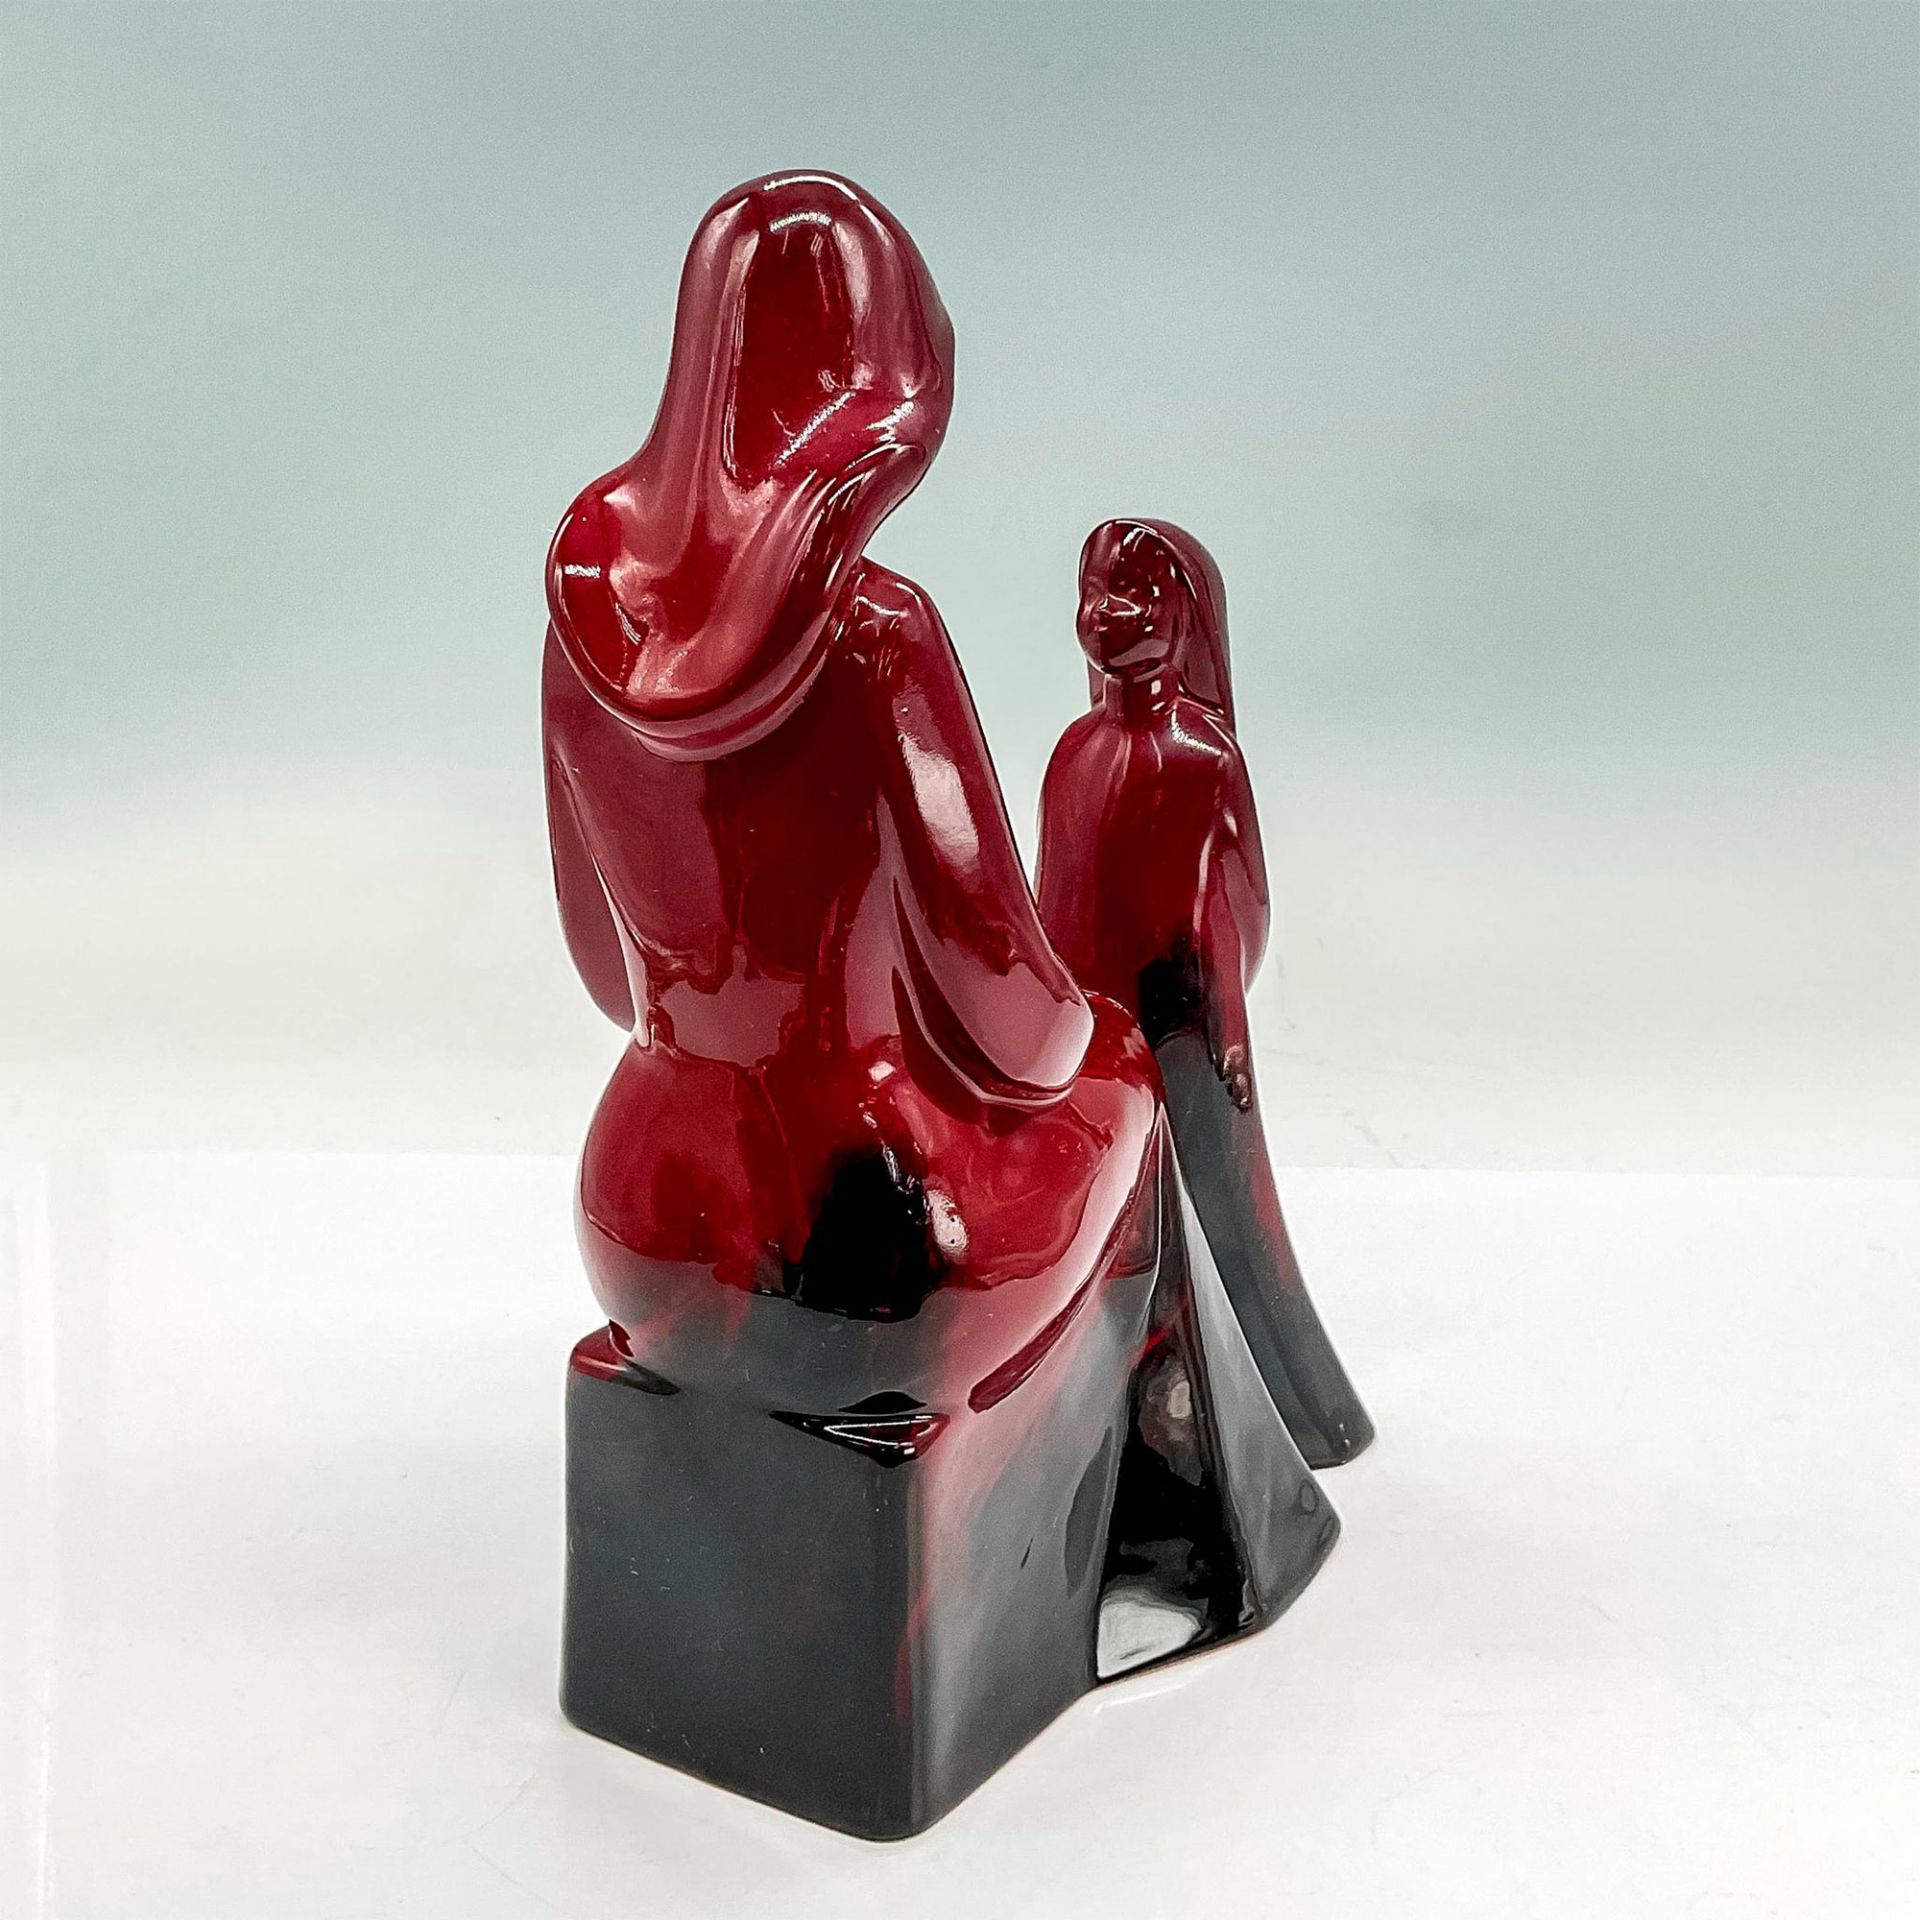 Mother and Daughter - Royal Doulton Flambe Prototype Figurine - Image 3 of 4